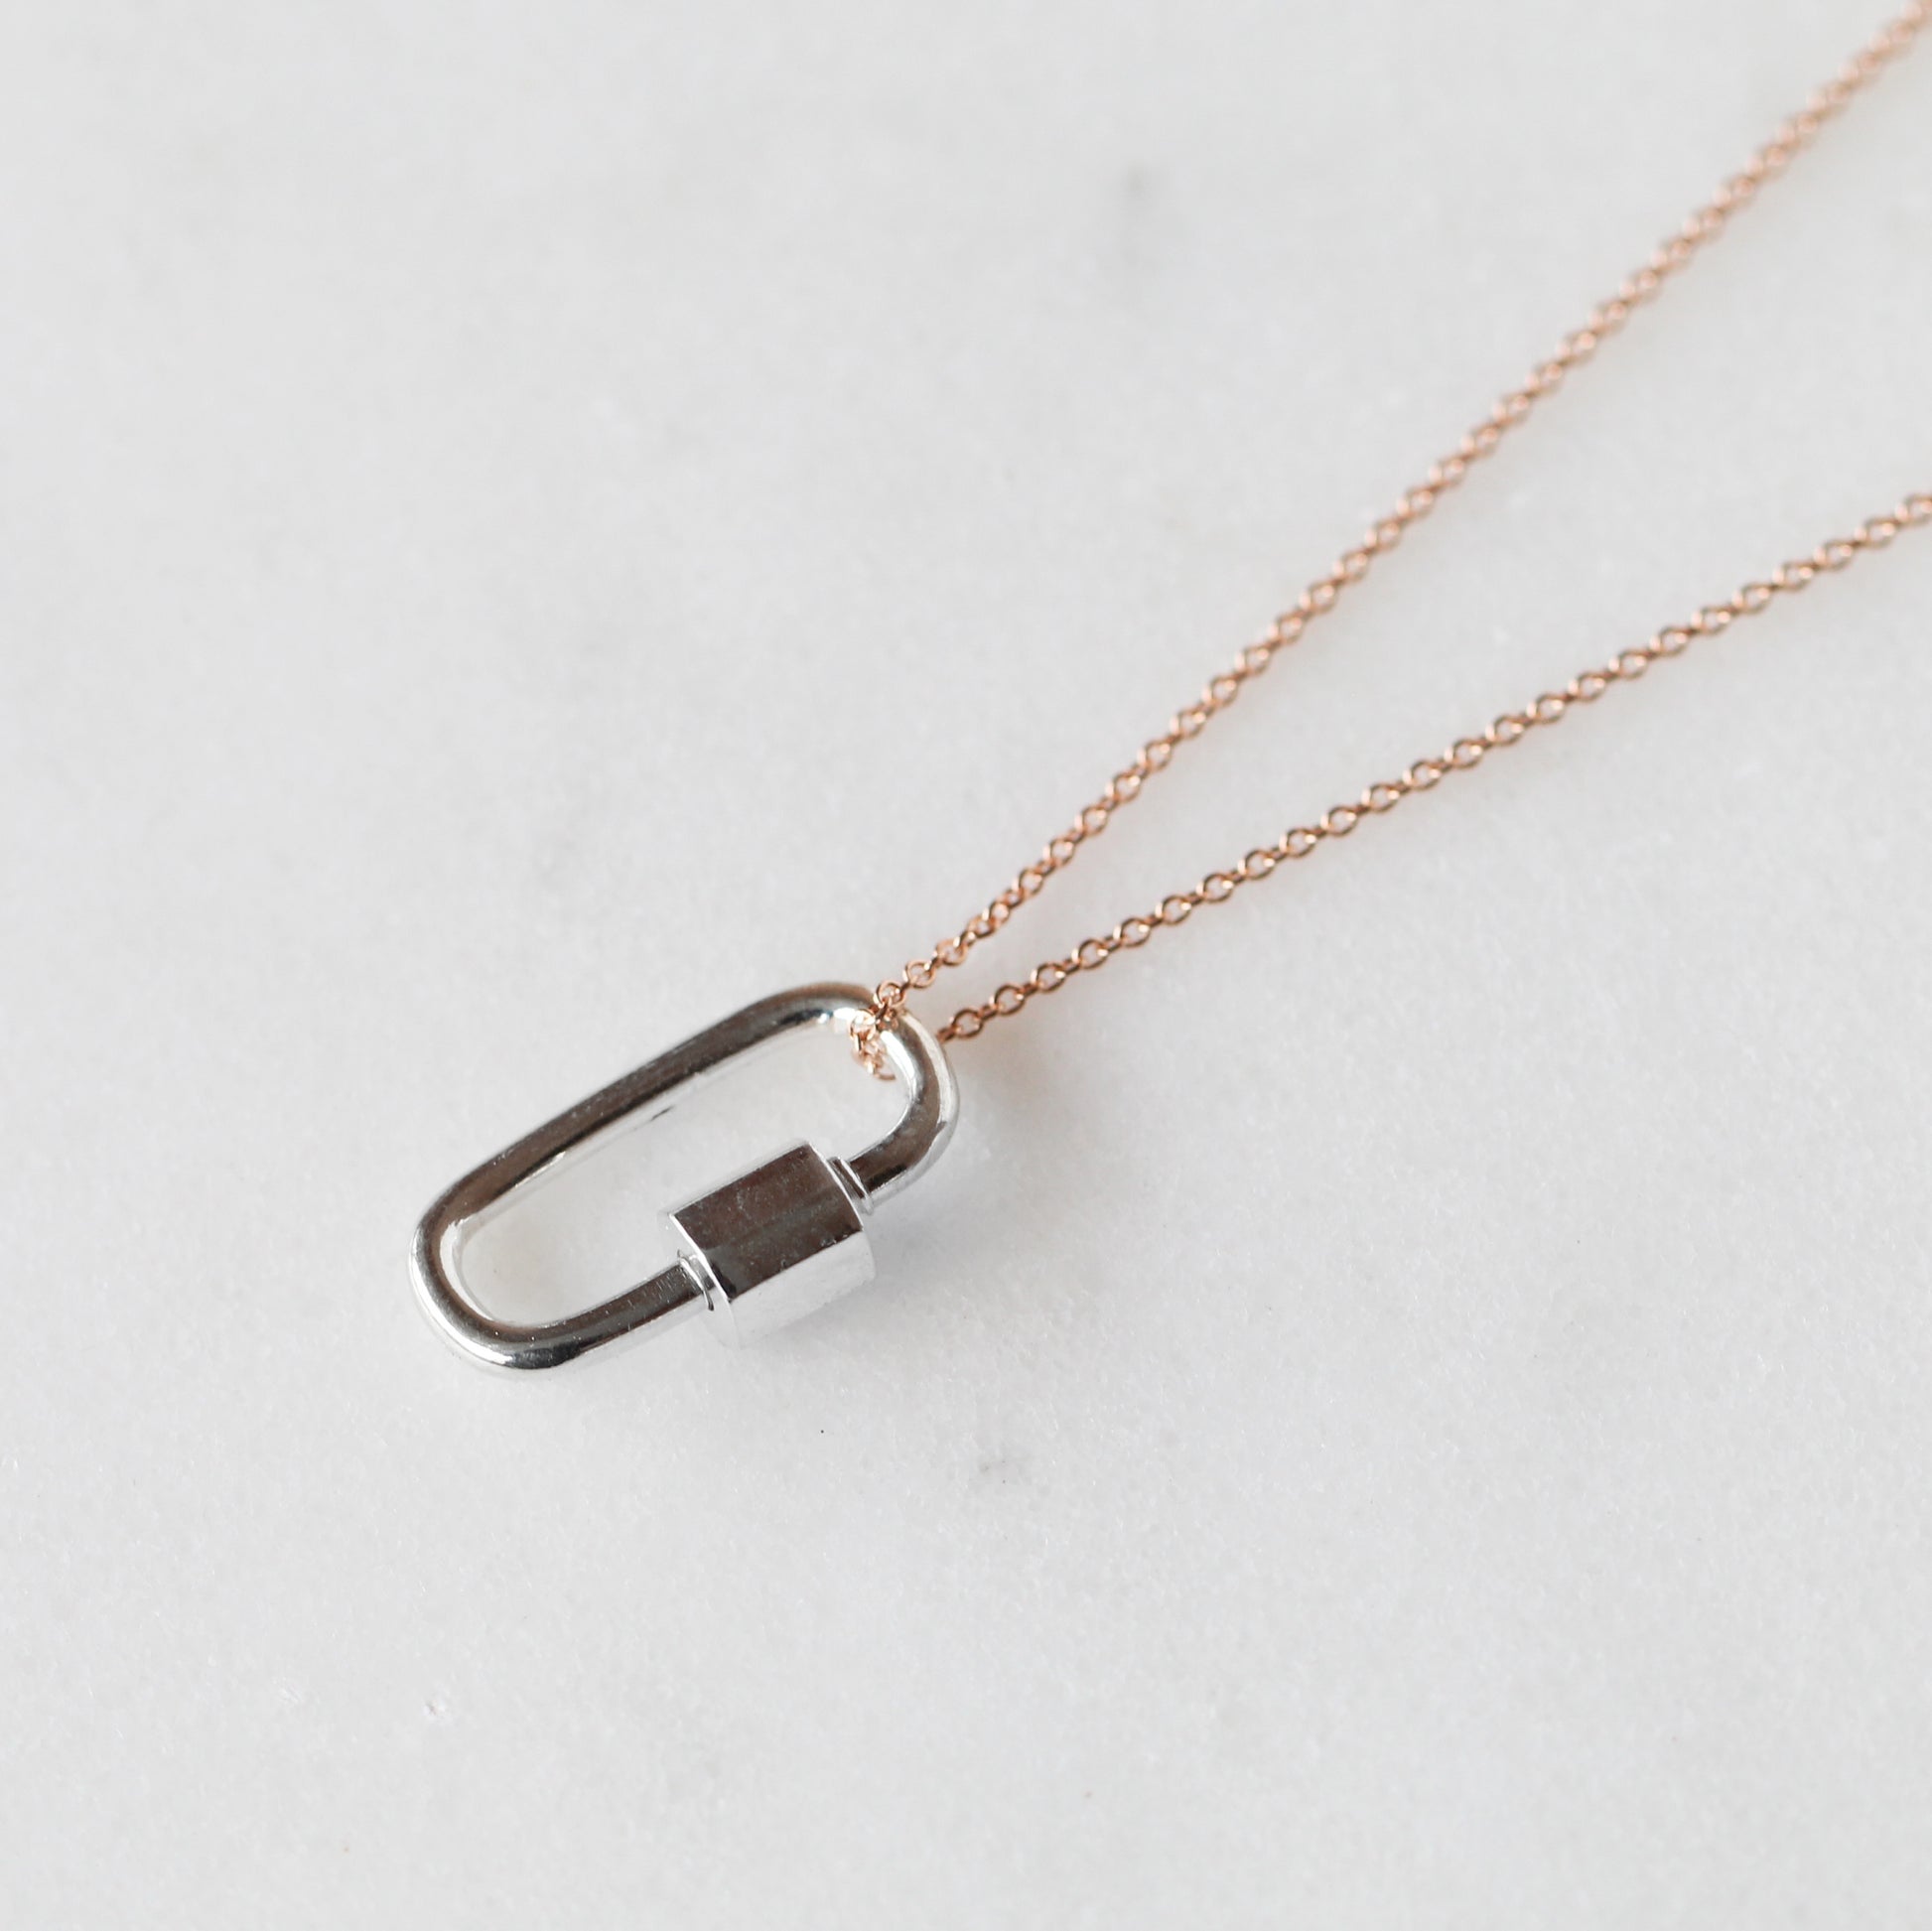 Minimal Cabrera Lock in Sterling Silver - Necklace with 14k Rose Gold Fill Chain - Midwinter Co. Alternative Bridal Rings and Modern Fine Jewelry